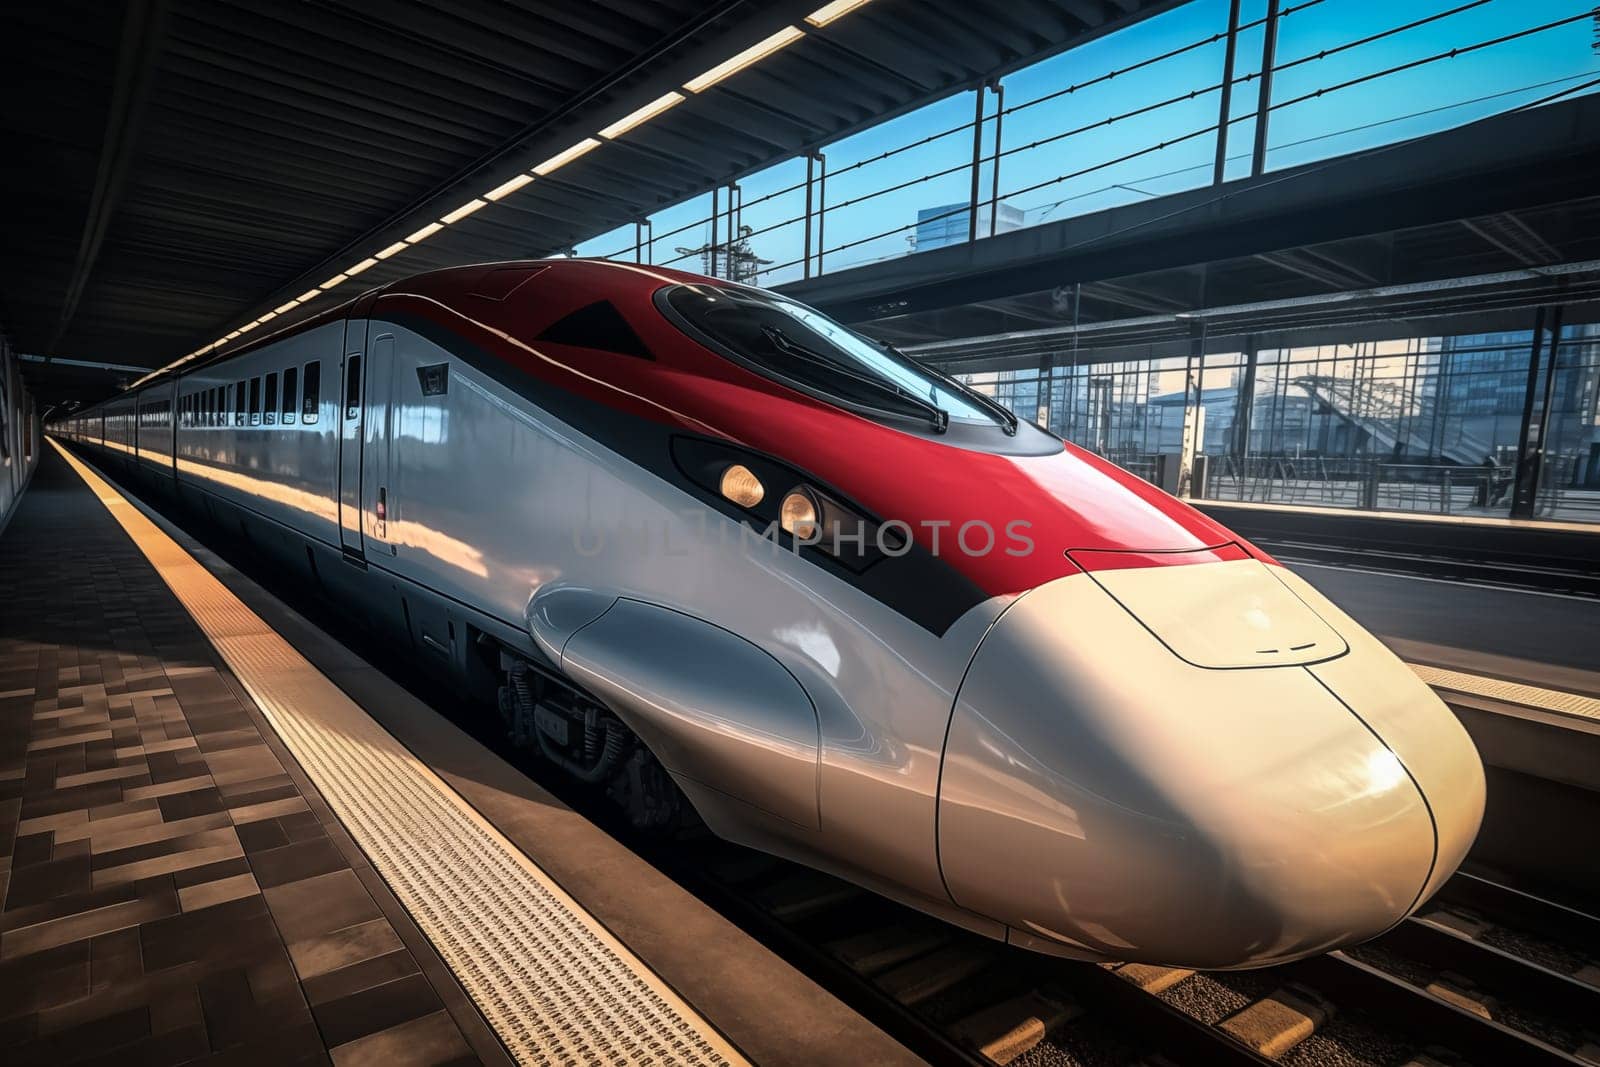 Modern high speed train in a futuristic train station. Modern transportation technology, speed, travel concepts. Railroad with motion blur effect